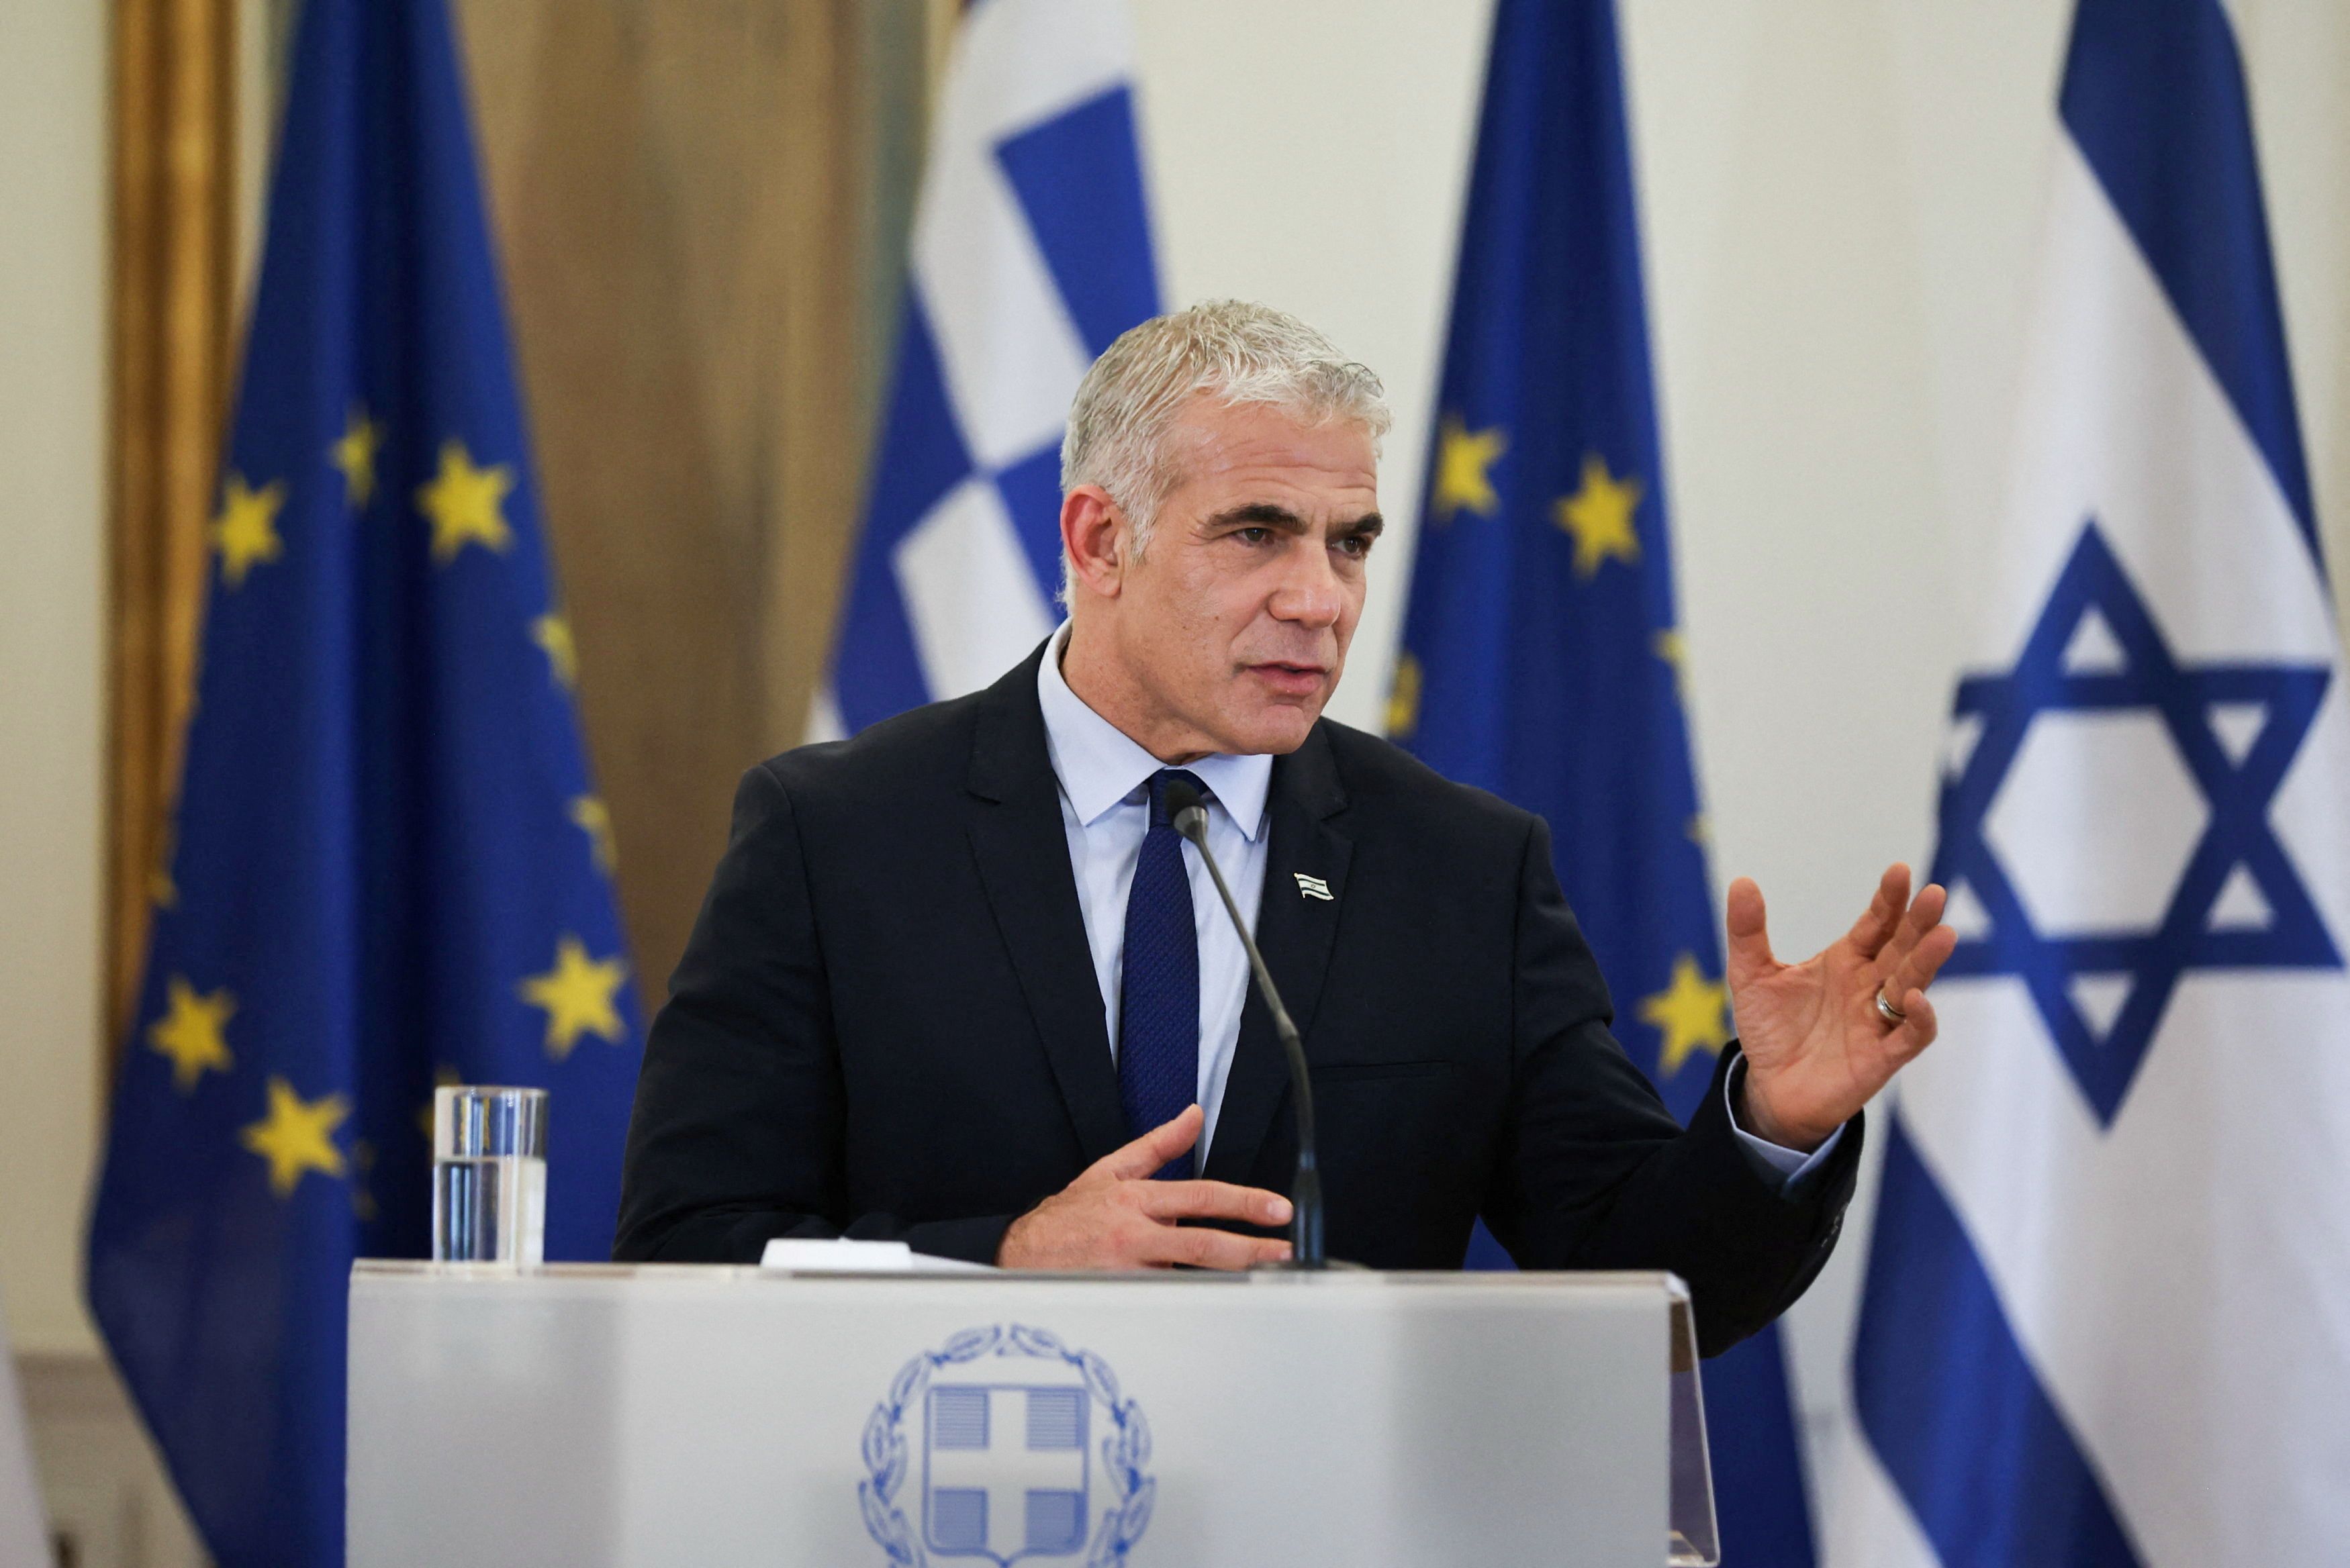 Israel's Foreign Minister Yair Lapid attends a news conference following a meeting at the Ministry of Foreign Affairs in Athens, Greece, on April 5.